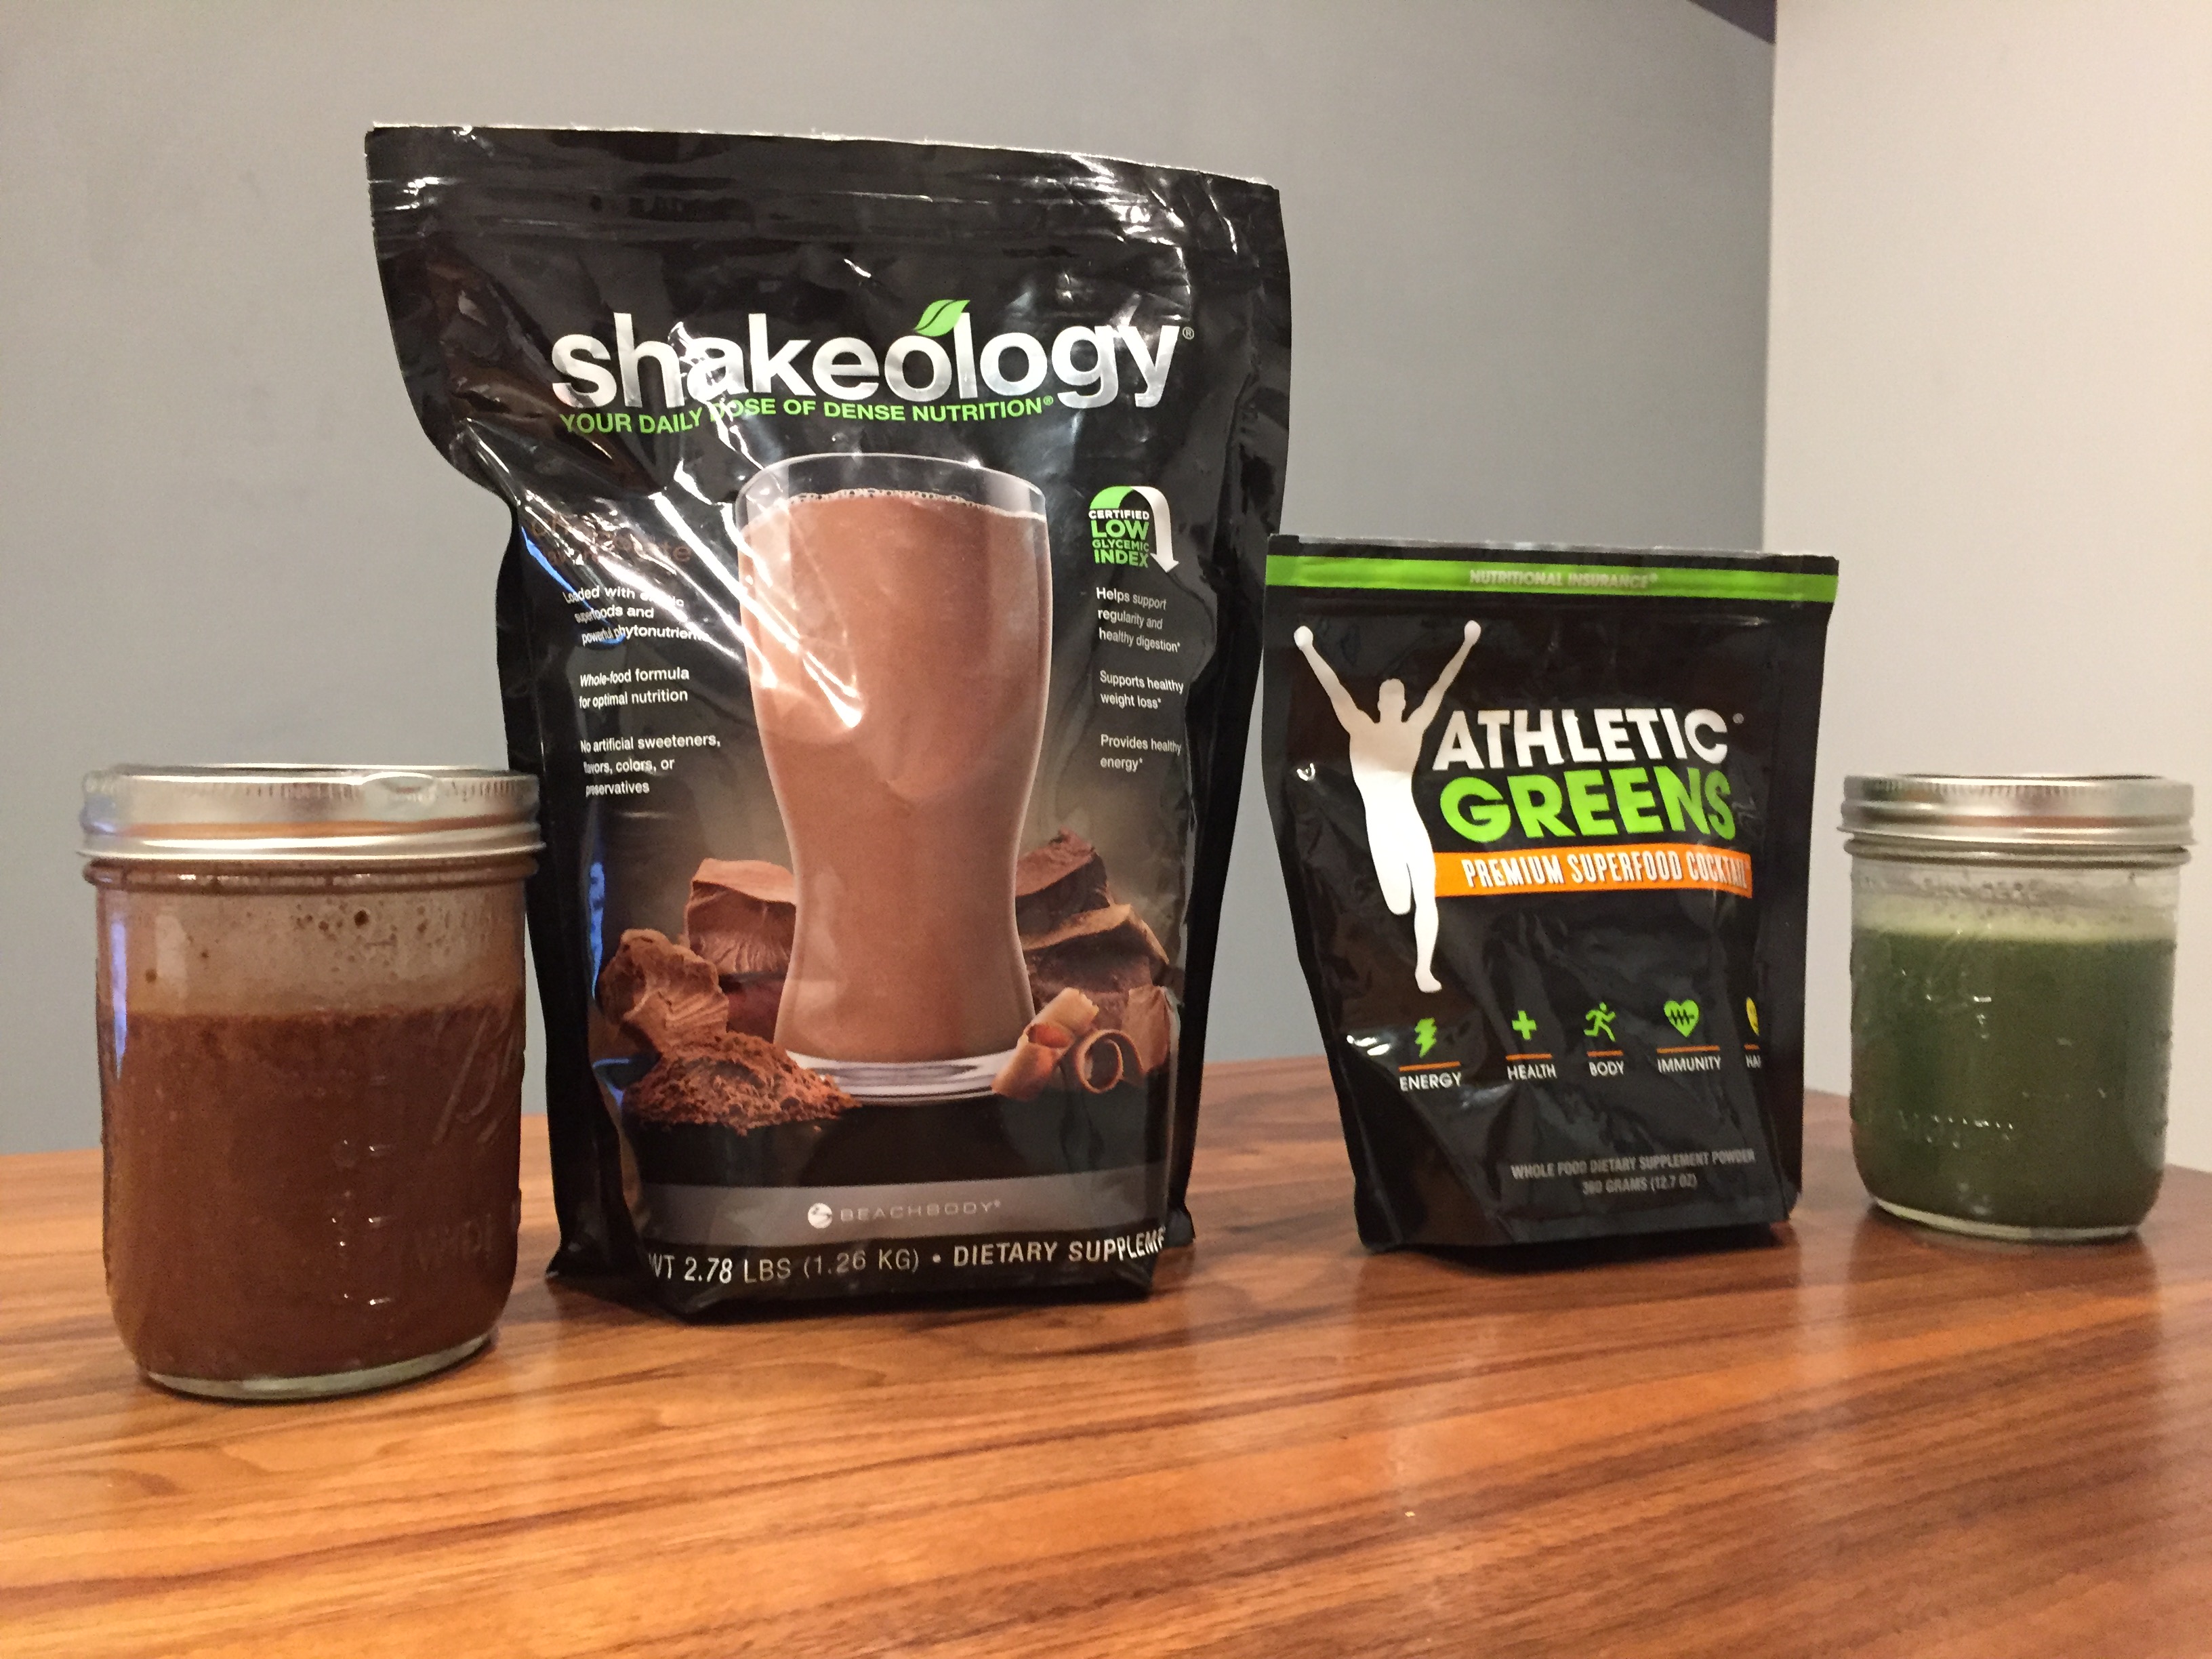 The Shakeology Boosts: What The Heck Are They? Statements